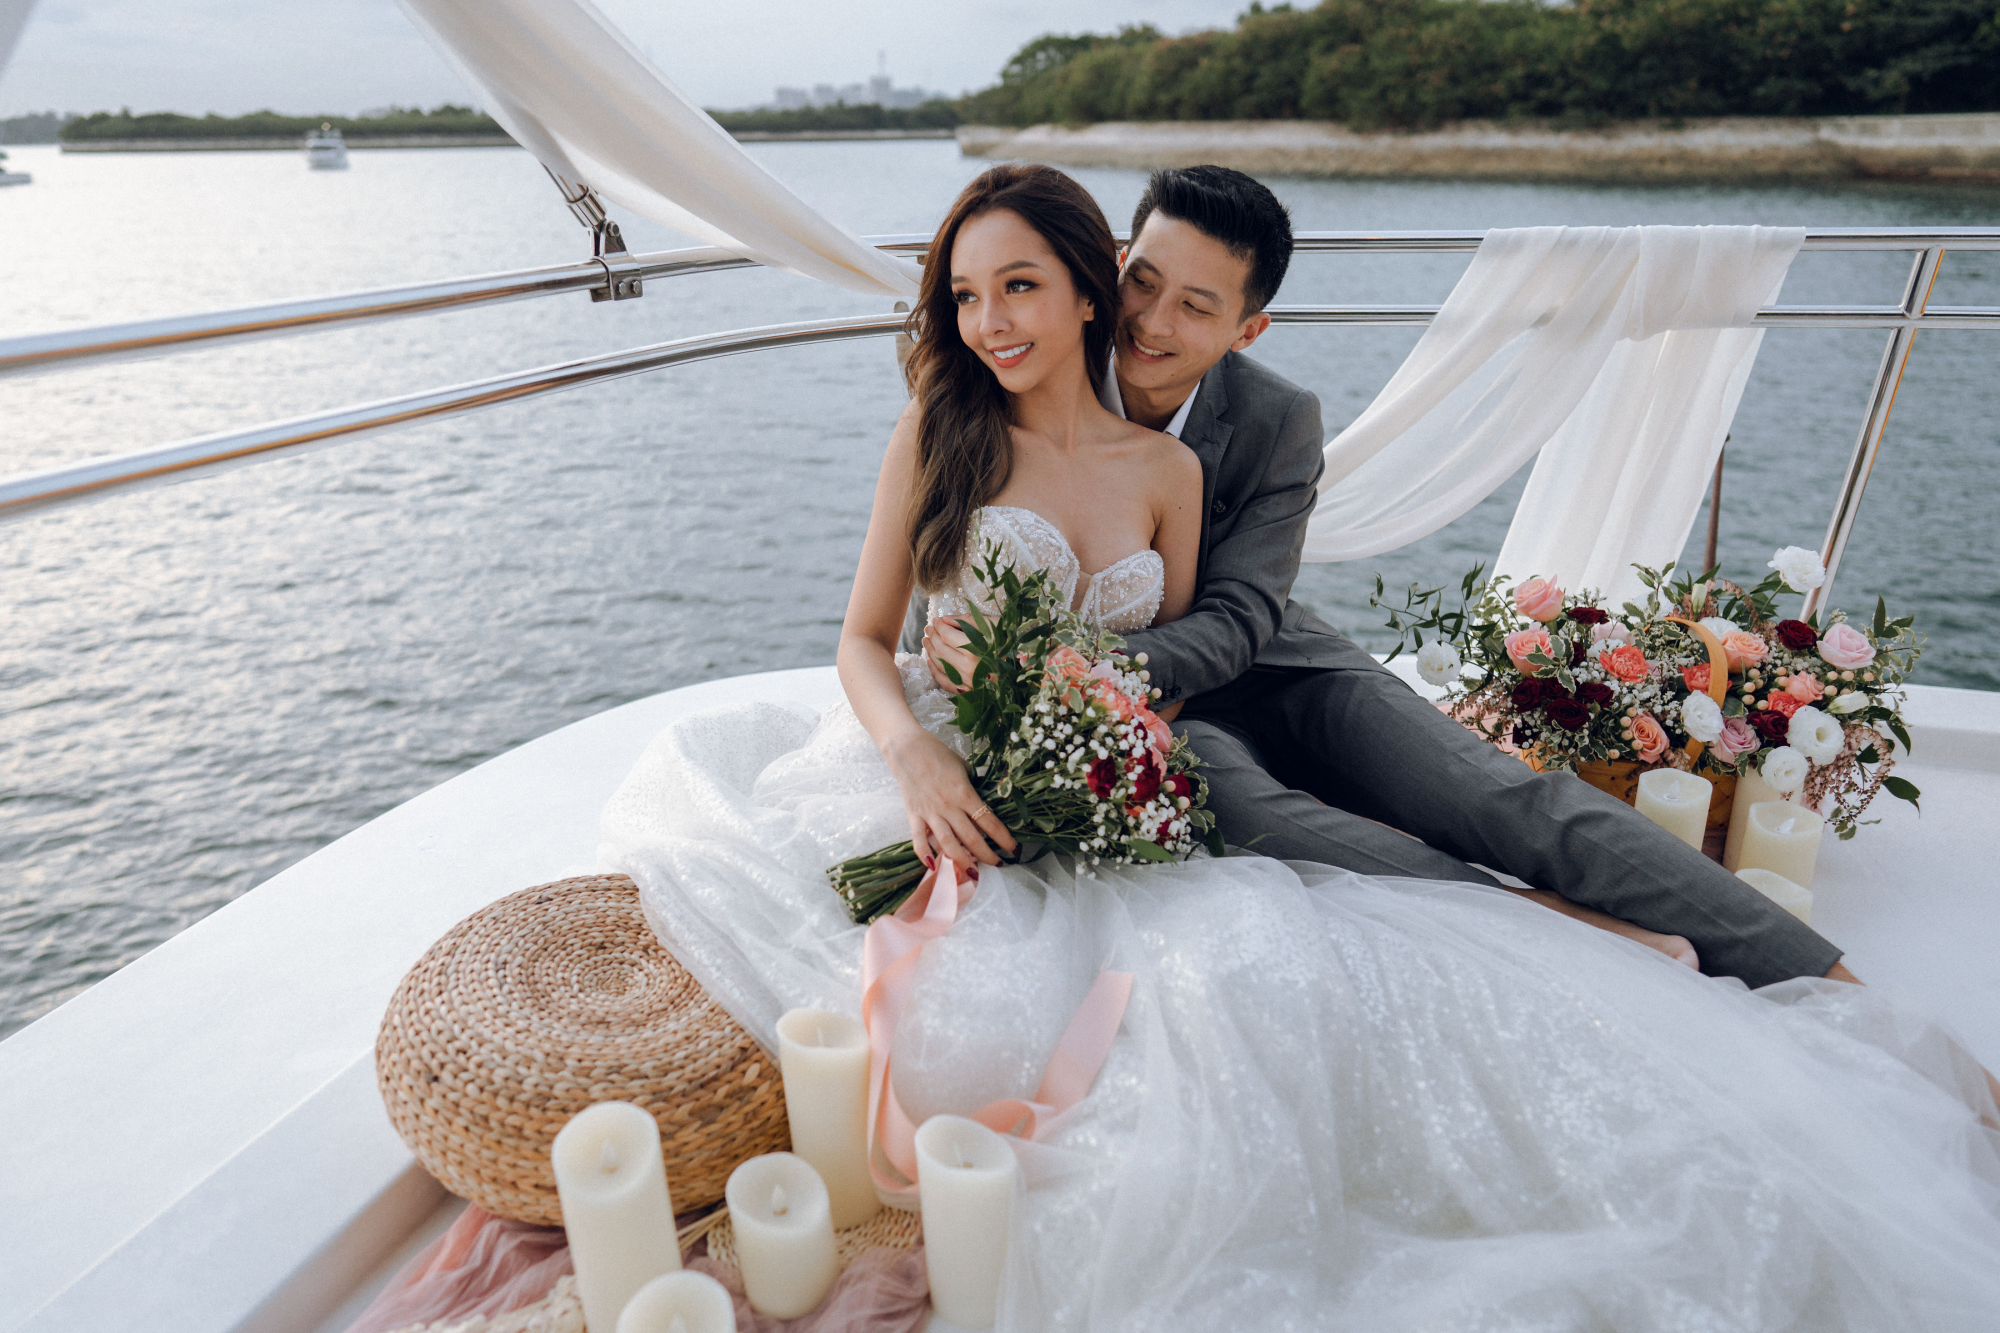 Sunset Prewedding Photoshoot On A Yacht With Romantic Floral Styling by Samantha on OneThreeOneFour 22